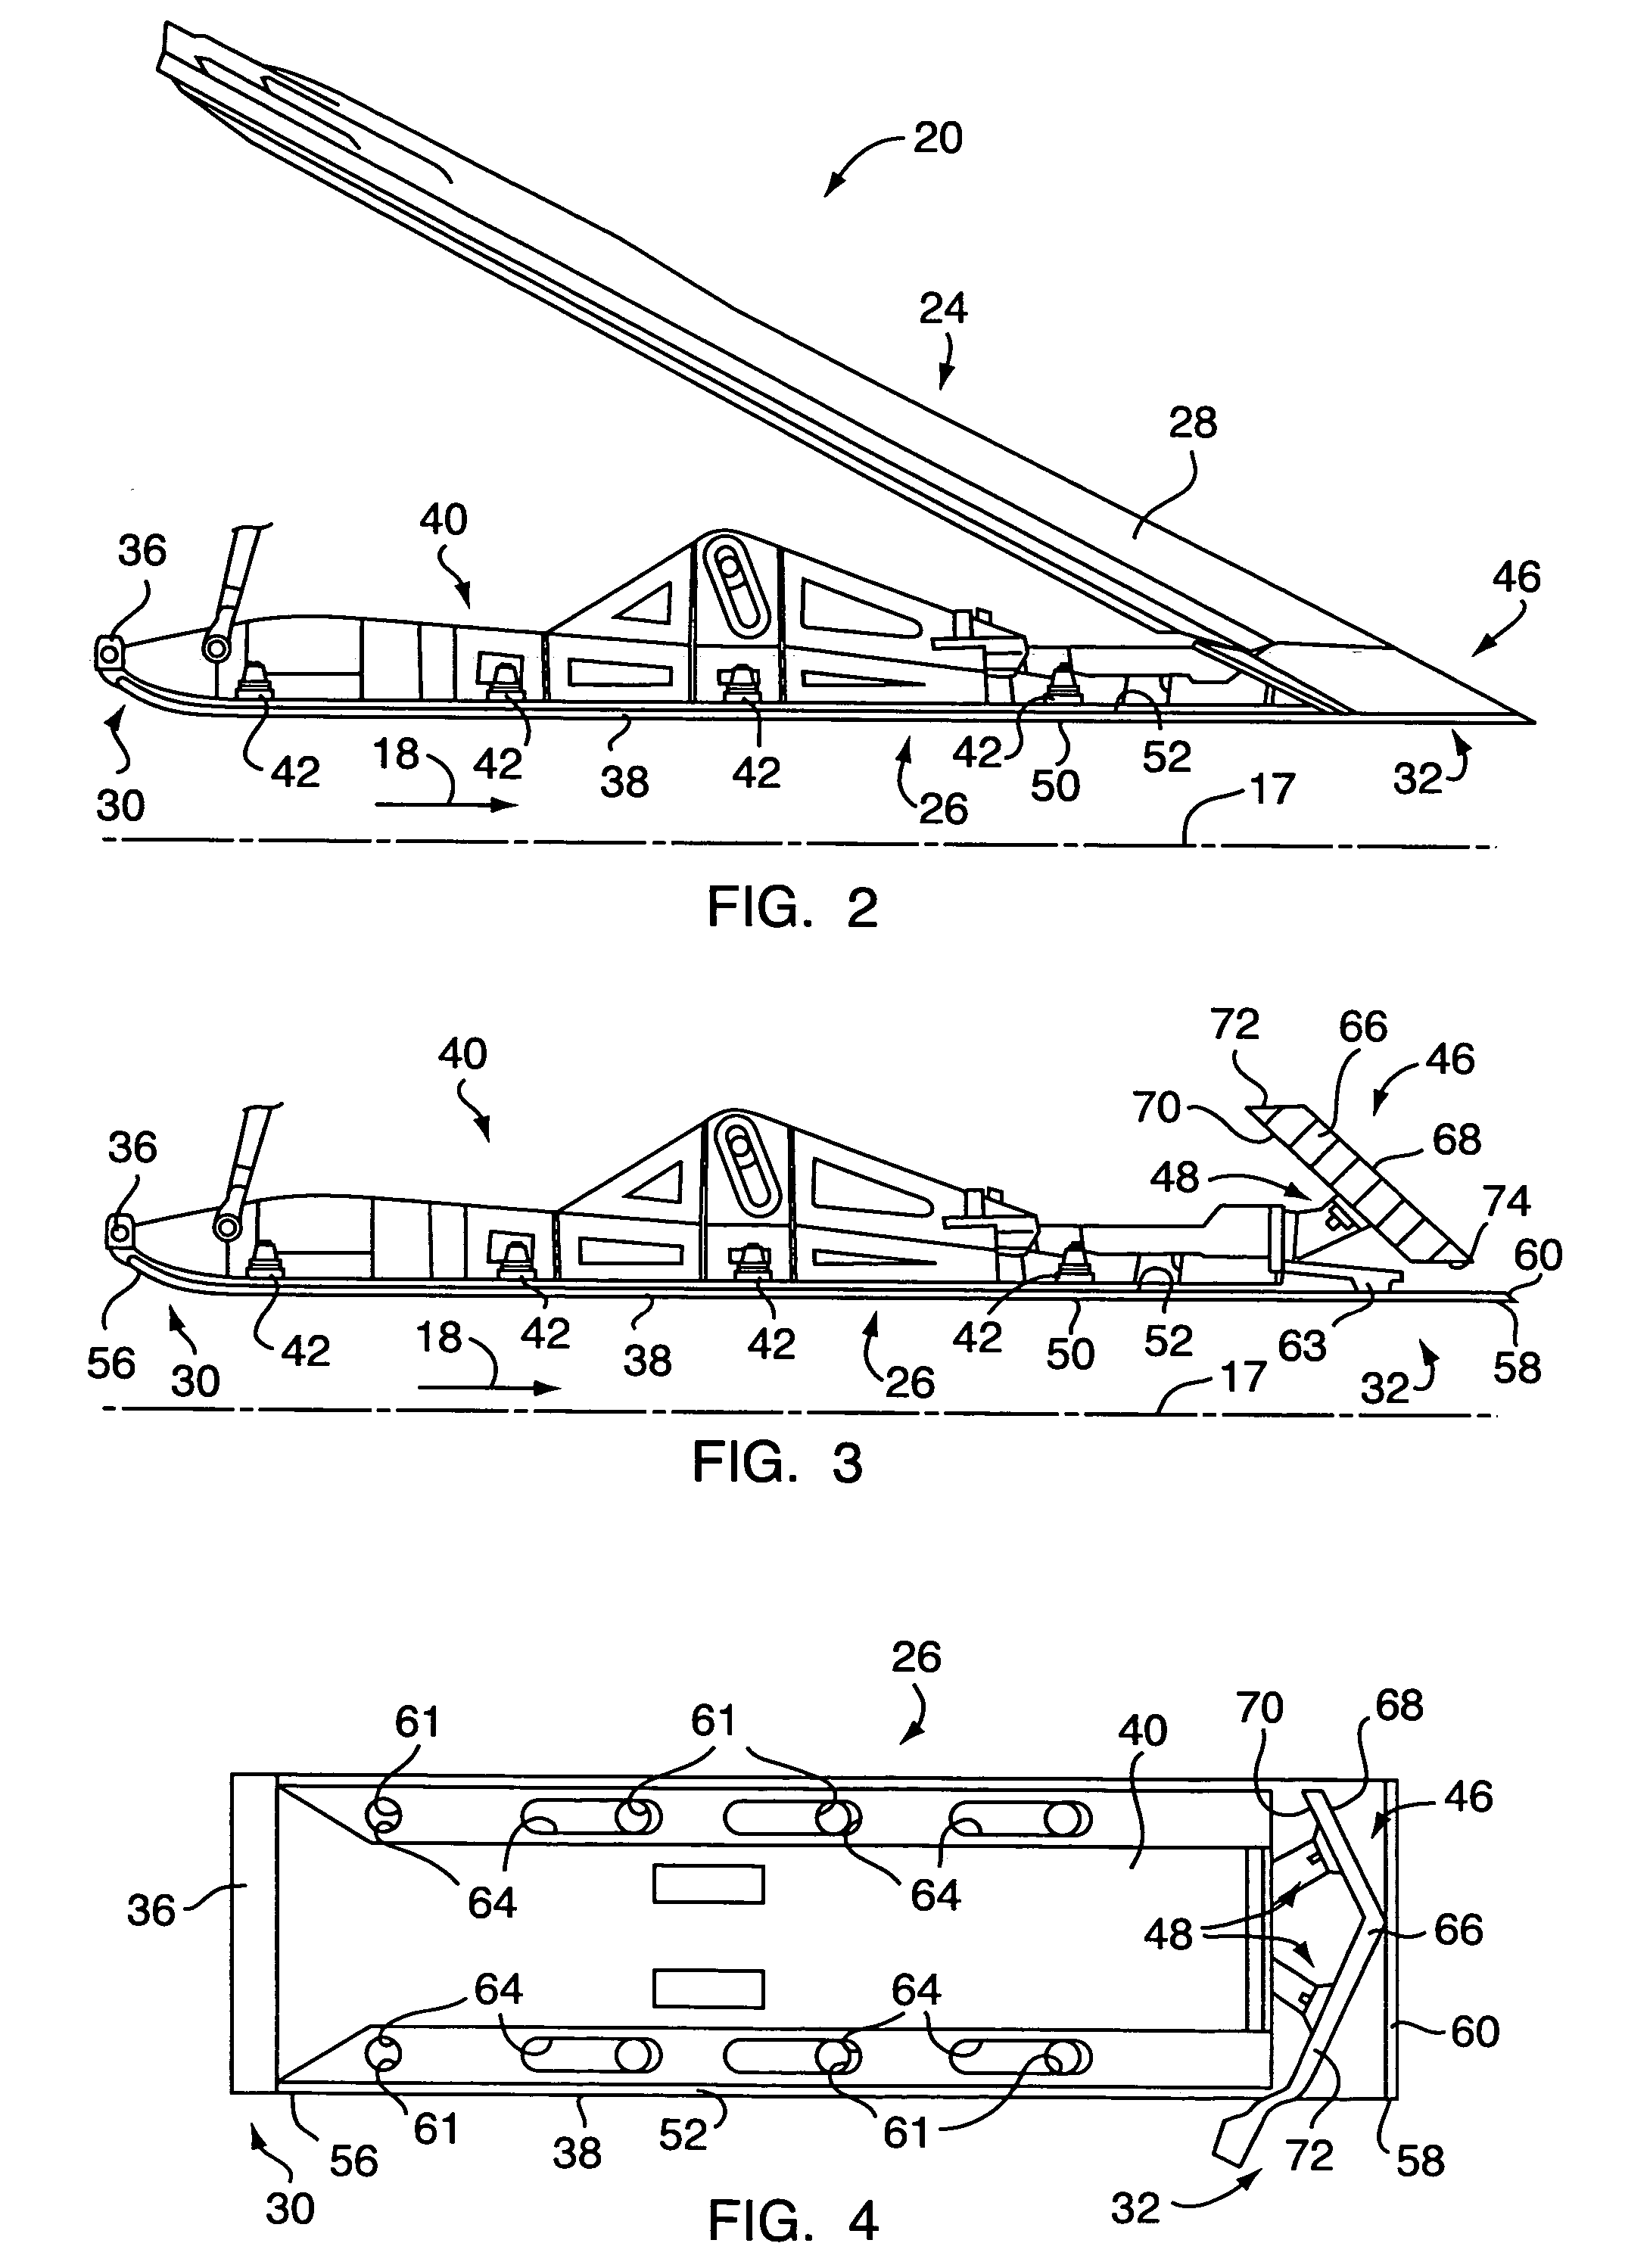 Fastener assembly for attaching a non-metal component to a metal component